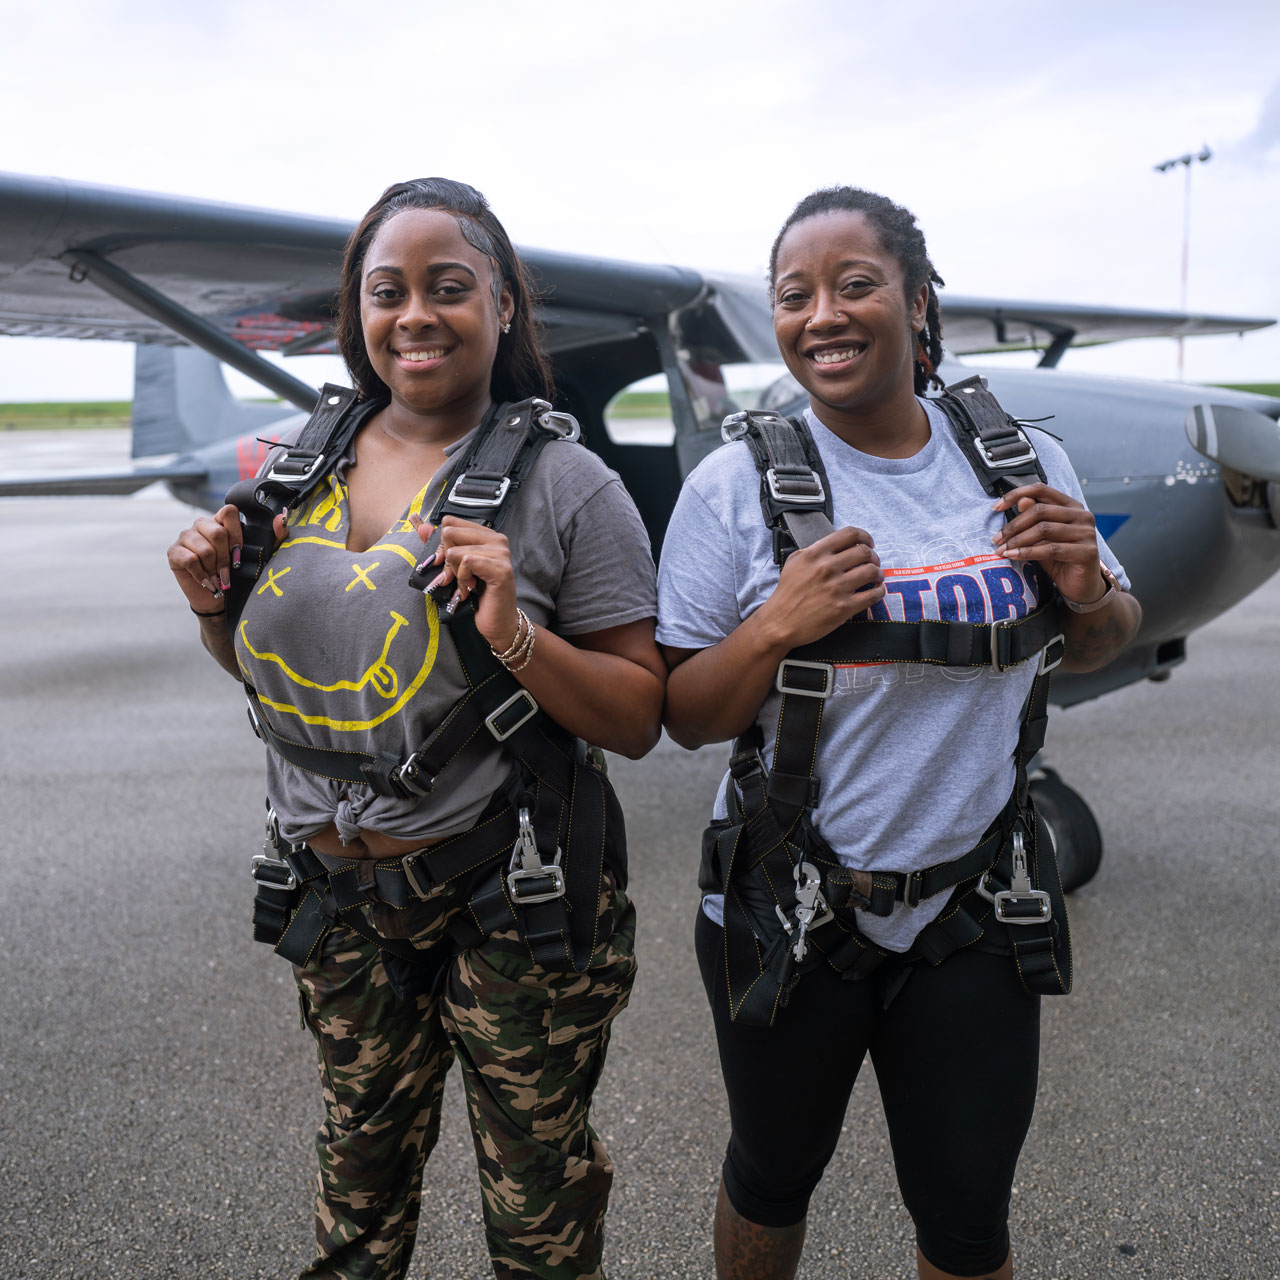 Two female tandem skydiving students pose in front of an airplane at Skydive Palm Beach in South Florida